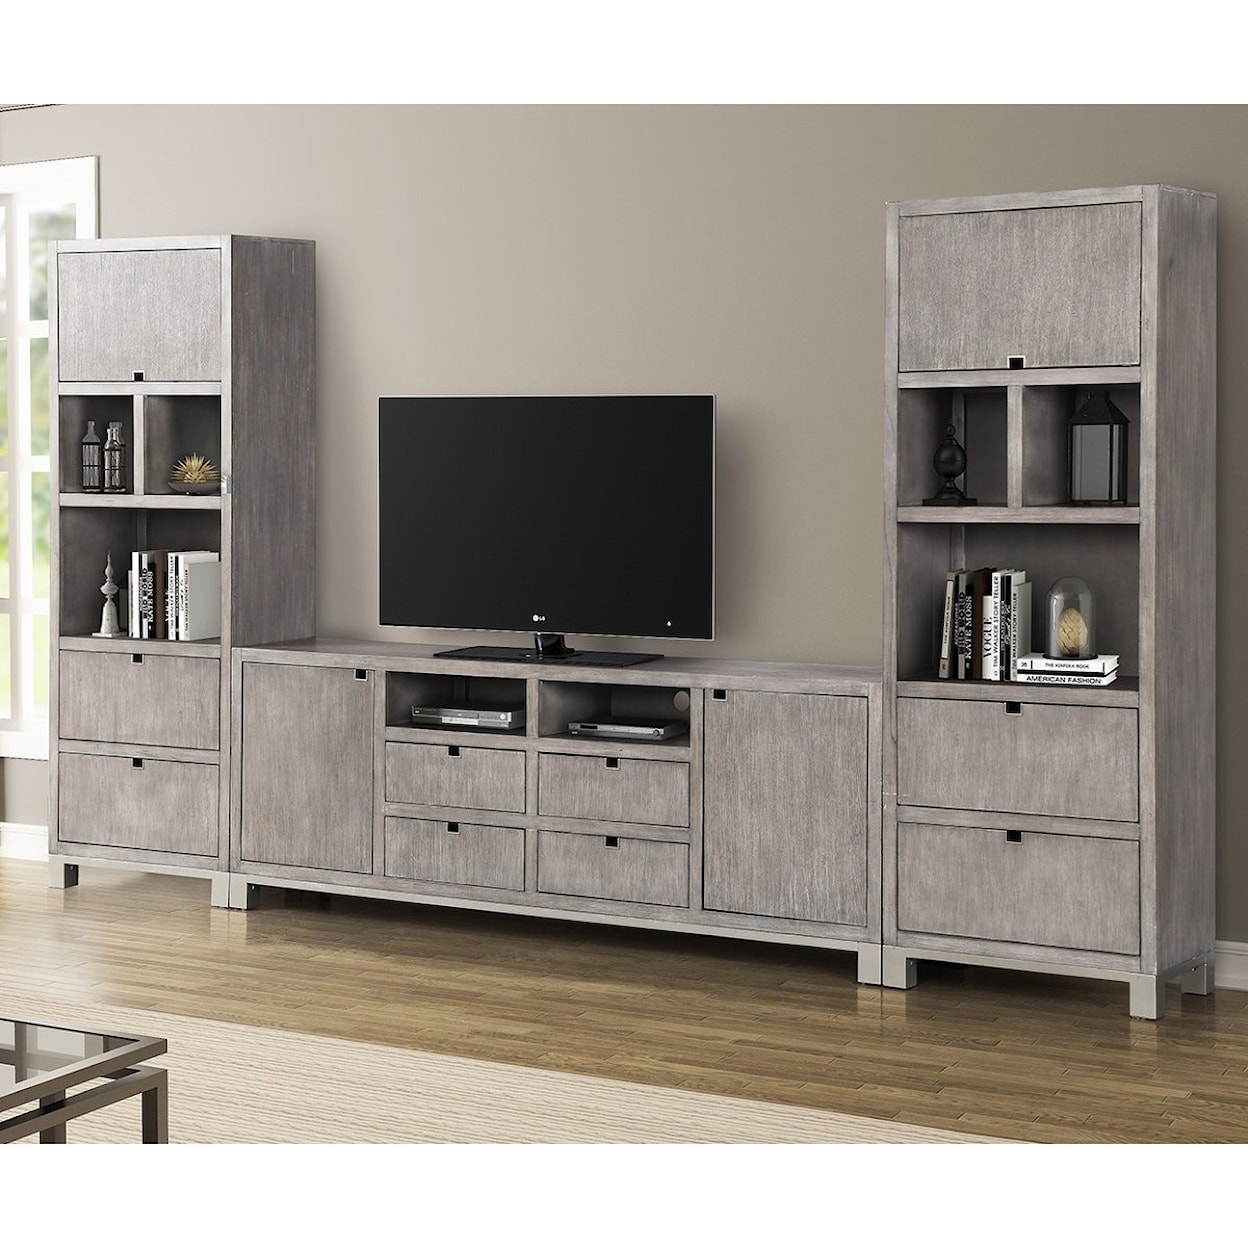 Legends Furniture Pacific Heights Entertainment Wall Unit